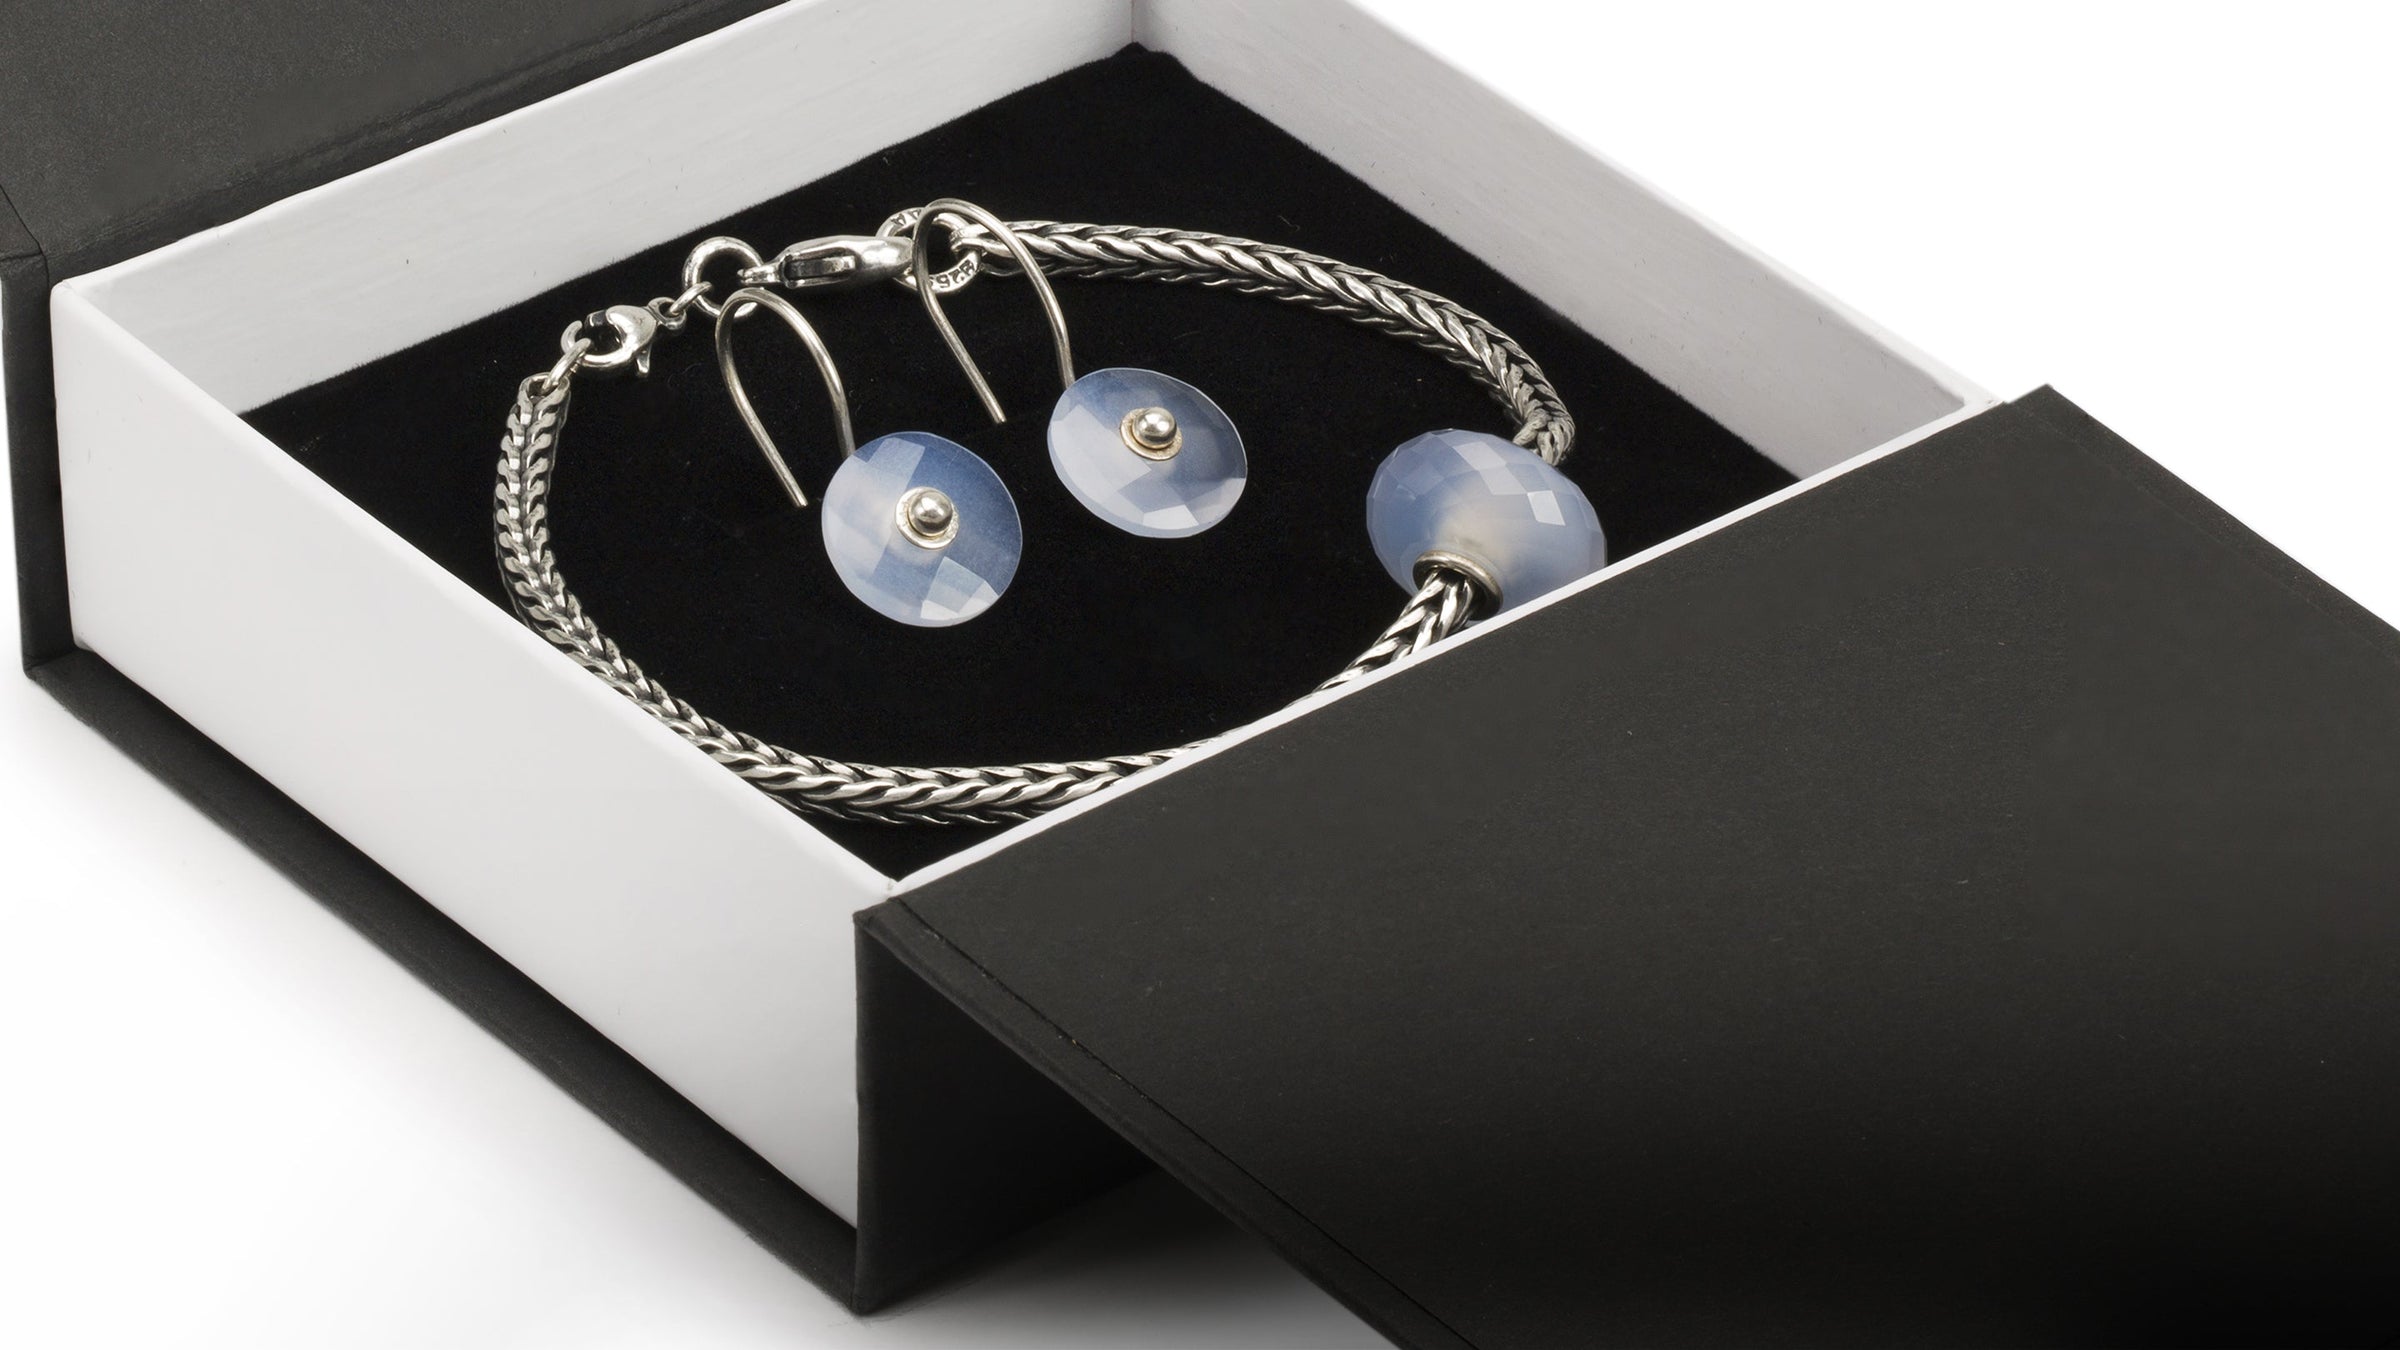 gift set with calcedonia earring hooks, and a silver foxtail bracelet with a calcedony bead and simple clasp